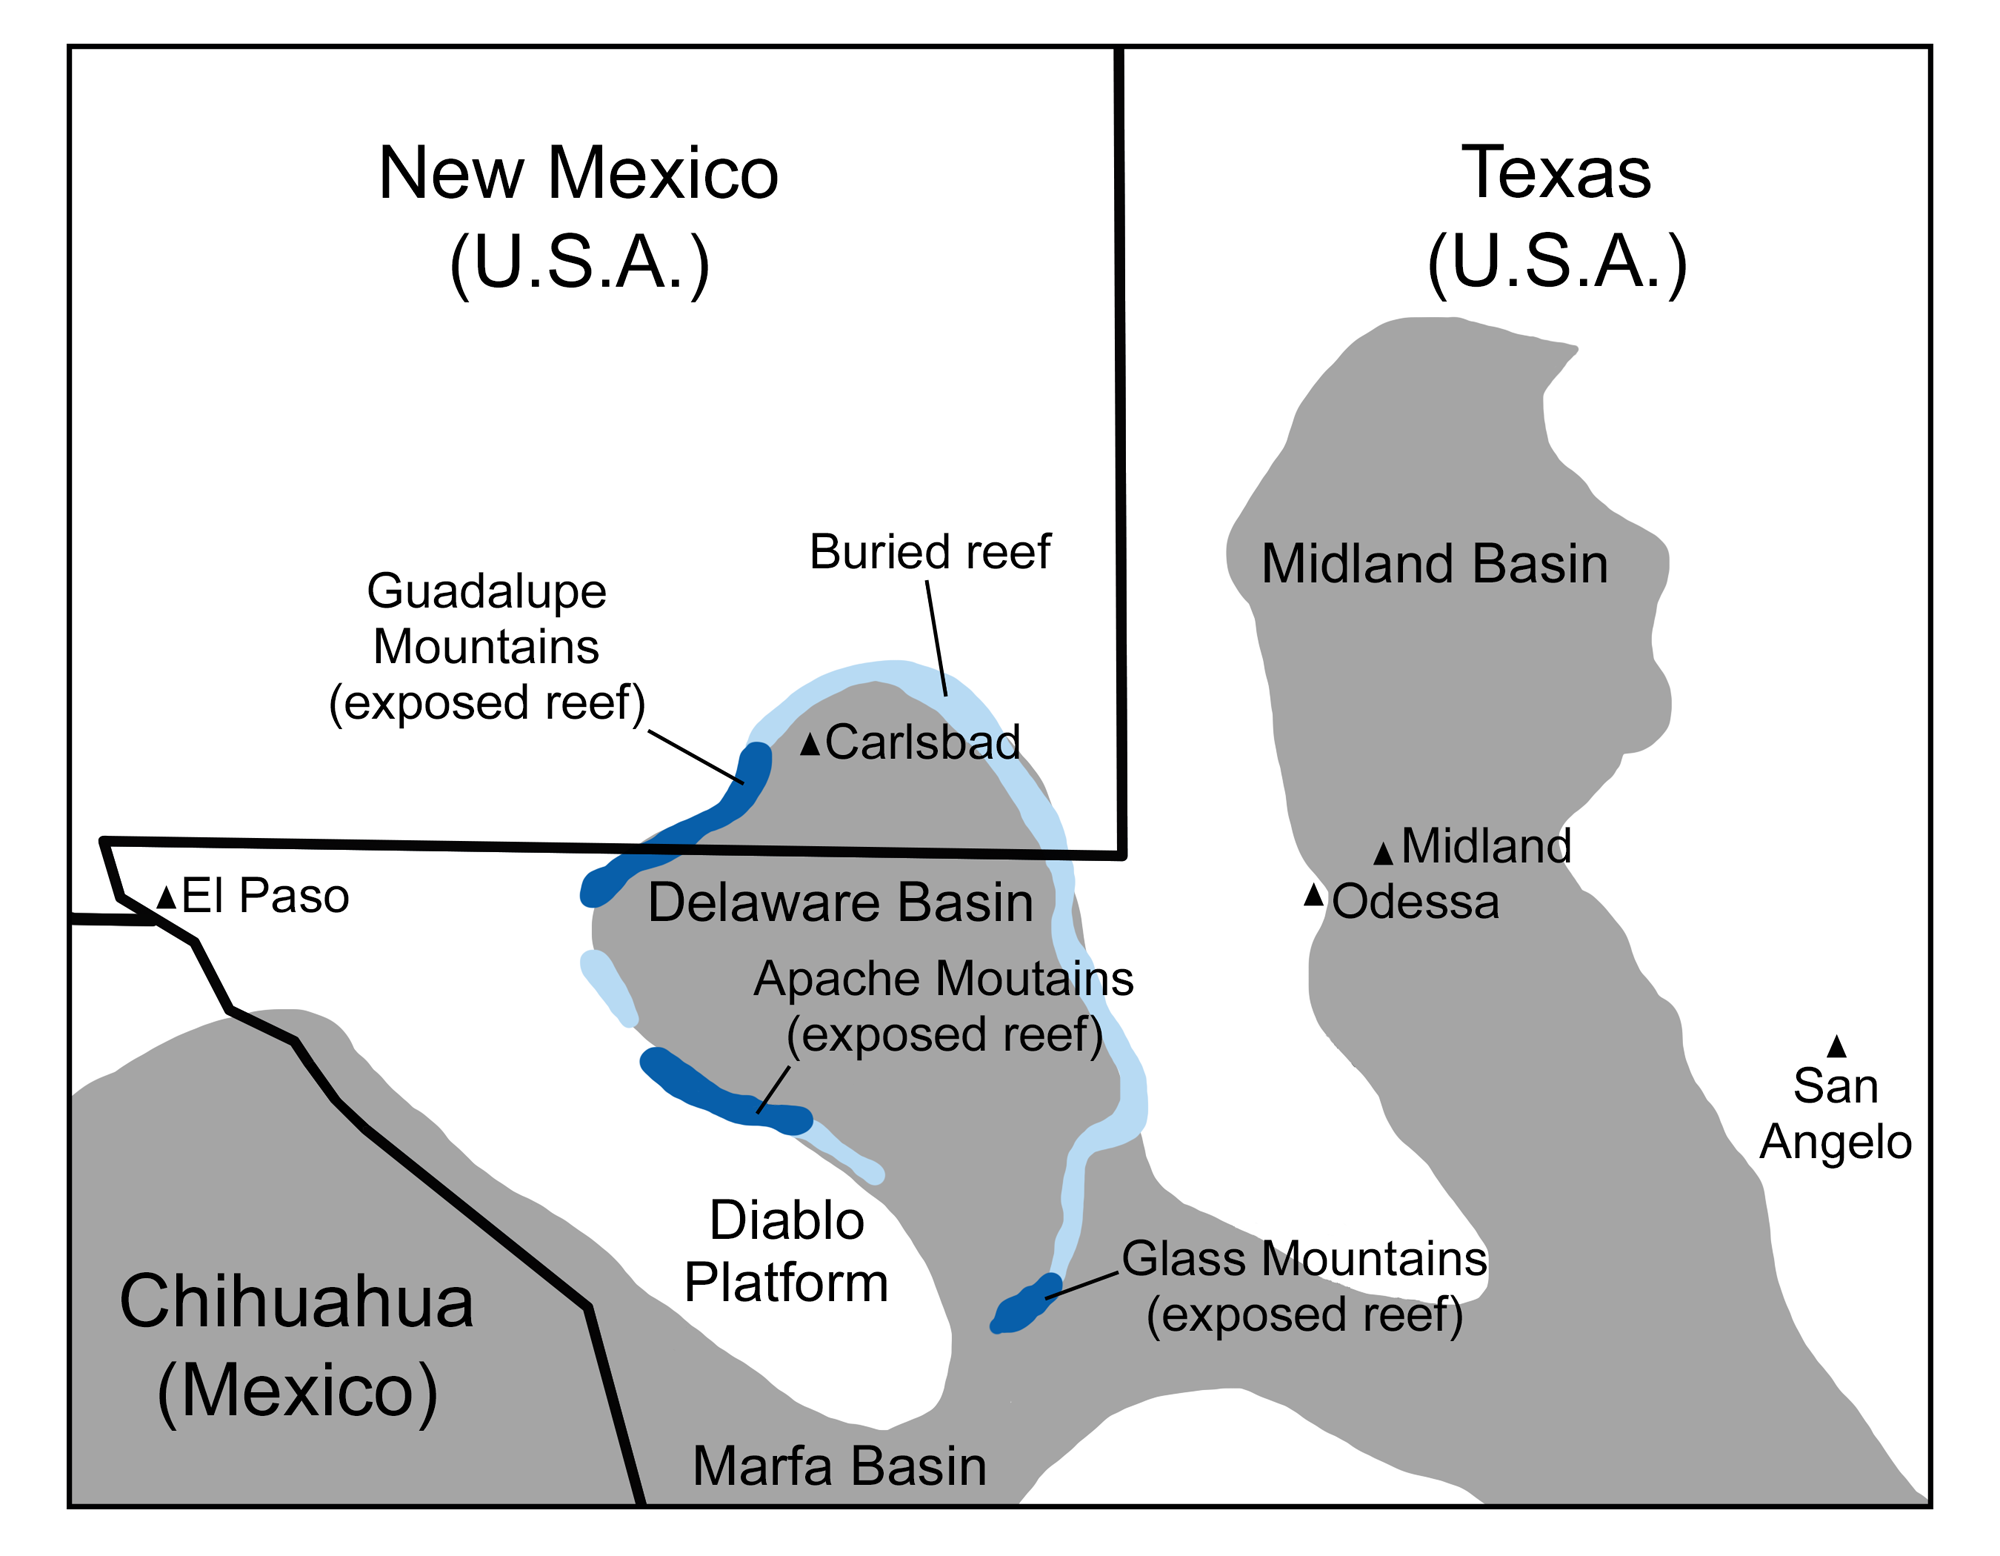 Map showing major Permian reefs and Basins in the Texas-New Mexico-Chihuahua (Mexico) border area. The reefs are on the edge of the Delaware Basin that straddles western Texas and southeastern New Mexico.